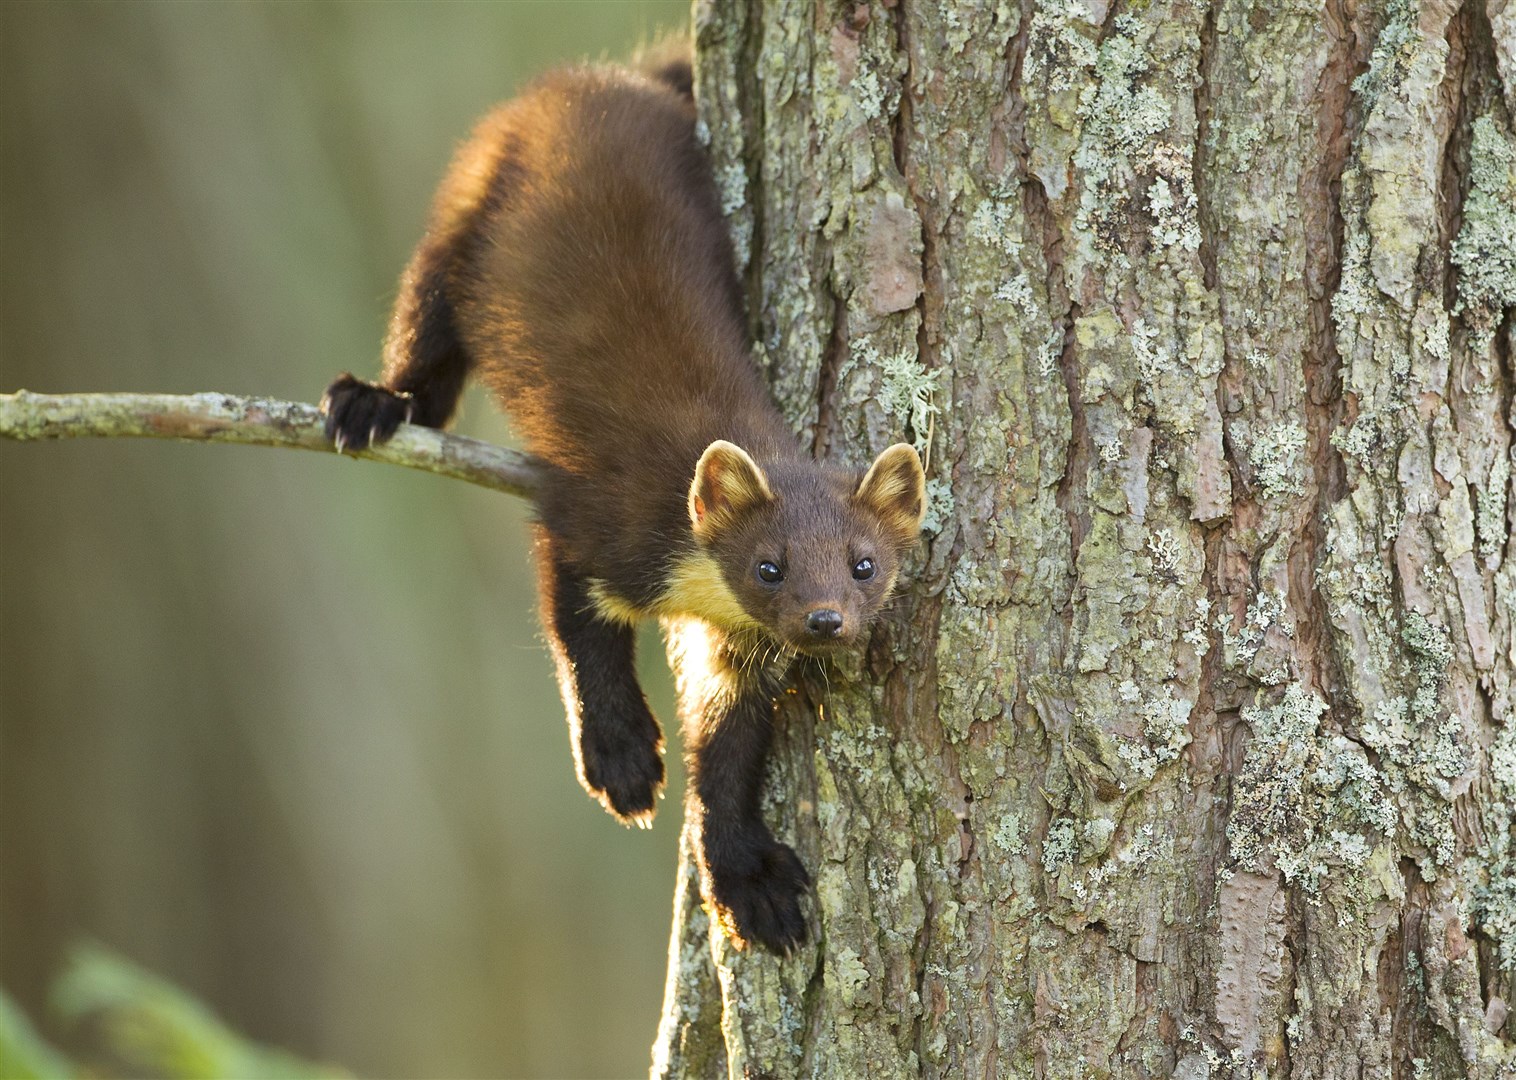 There have been claims that without proper predator control of species such as protected pine martens, capercaillie numbers will never recover.